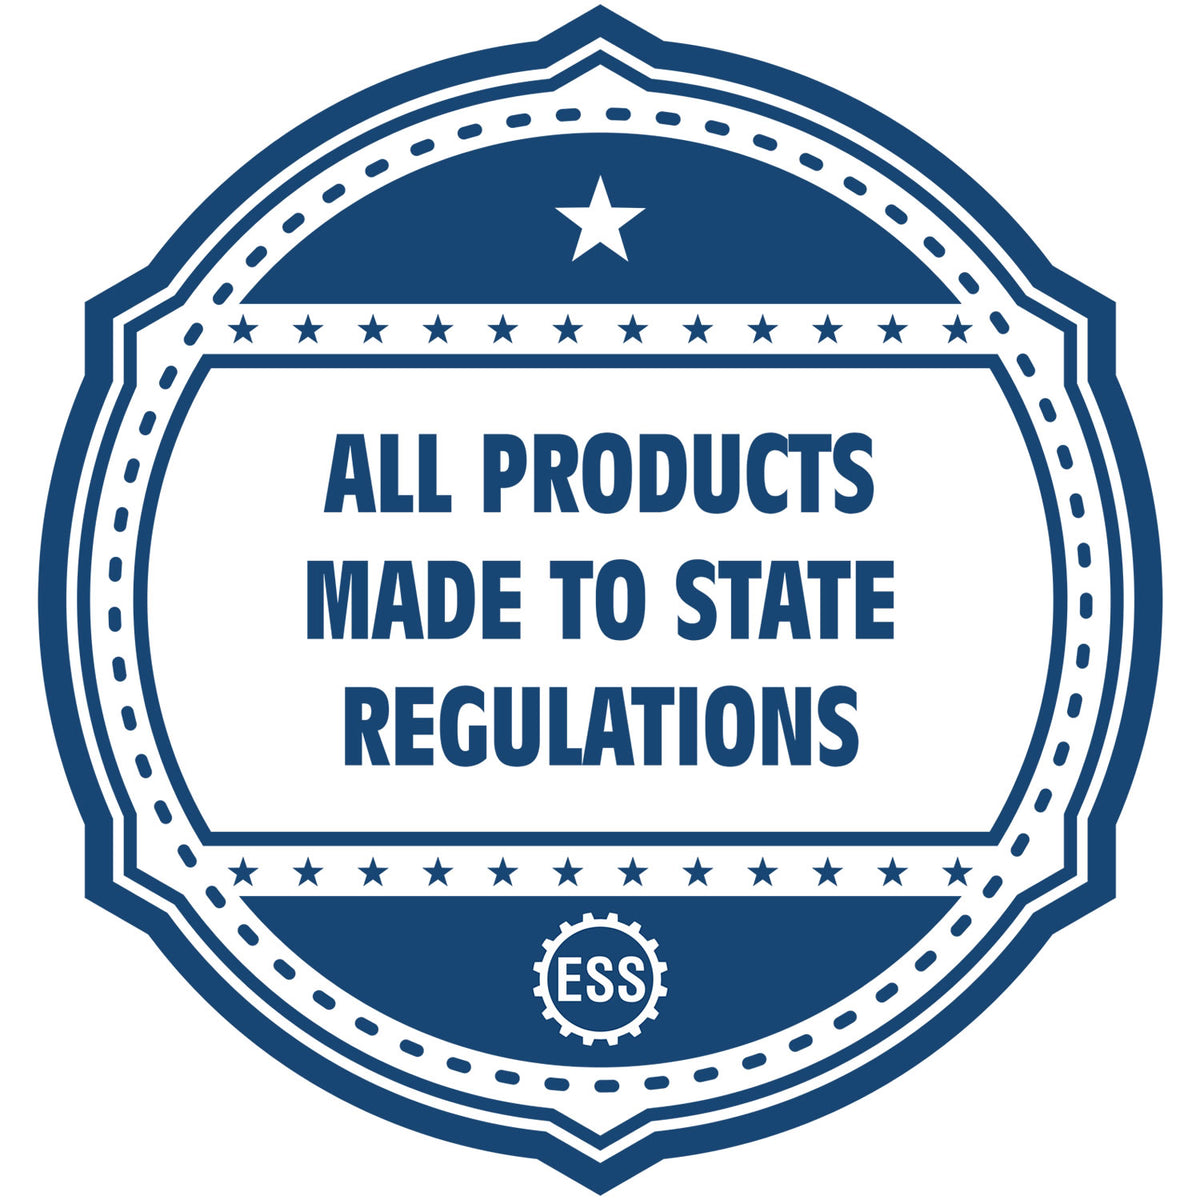 An icon or badge element for the Super Slim Arizona Notary Public Stamp showing that this product is made in compliance with state regulations.